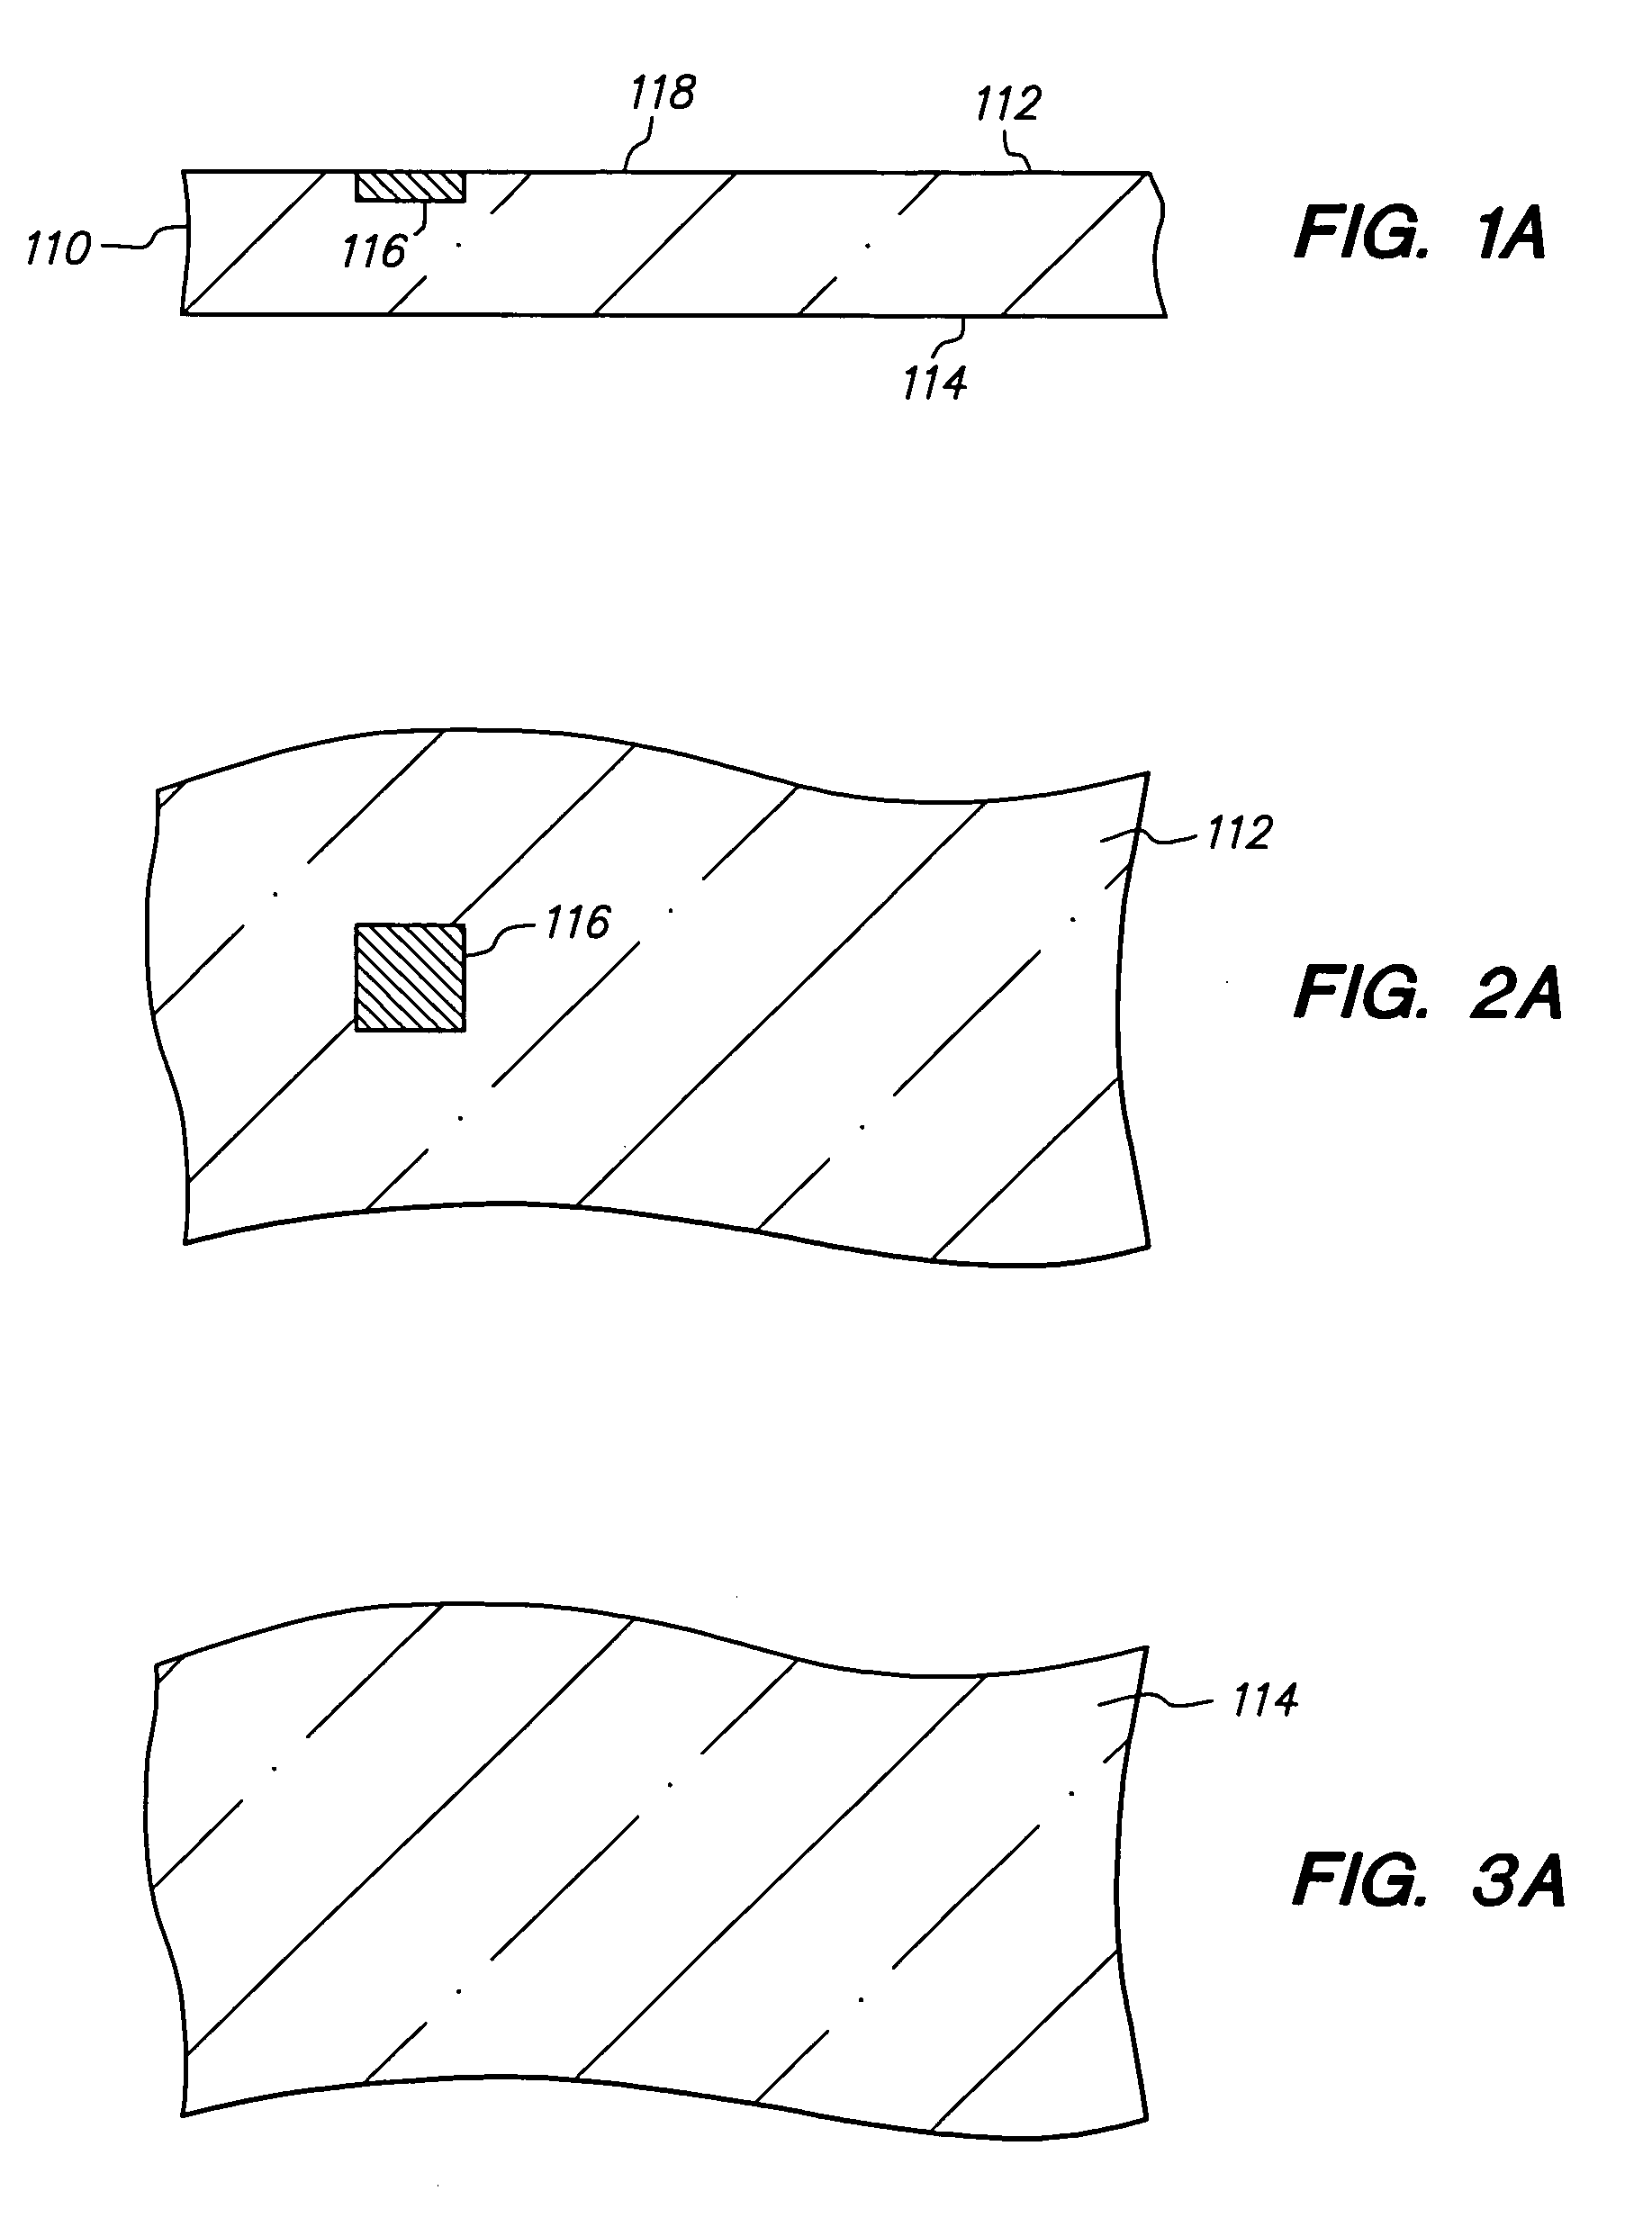 Method of connecting a conductive trace to a semiconductor chip using conductive adhesive